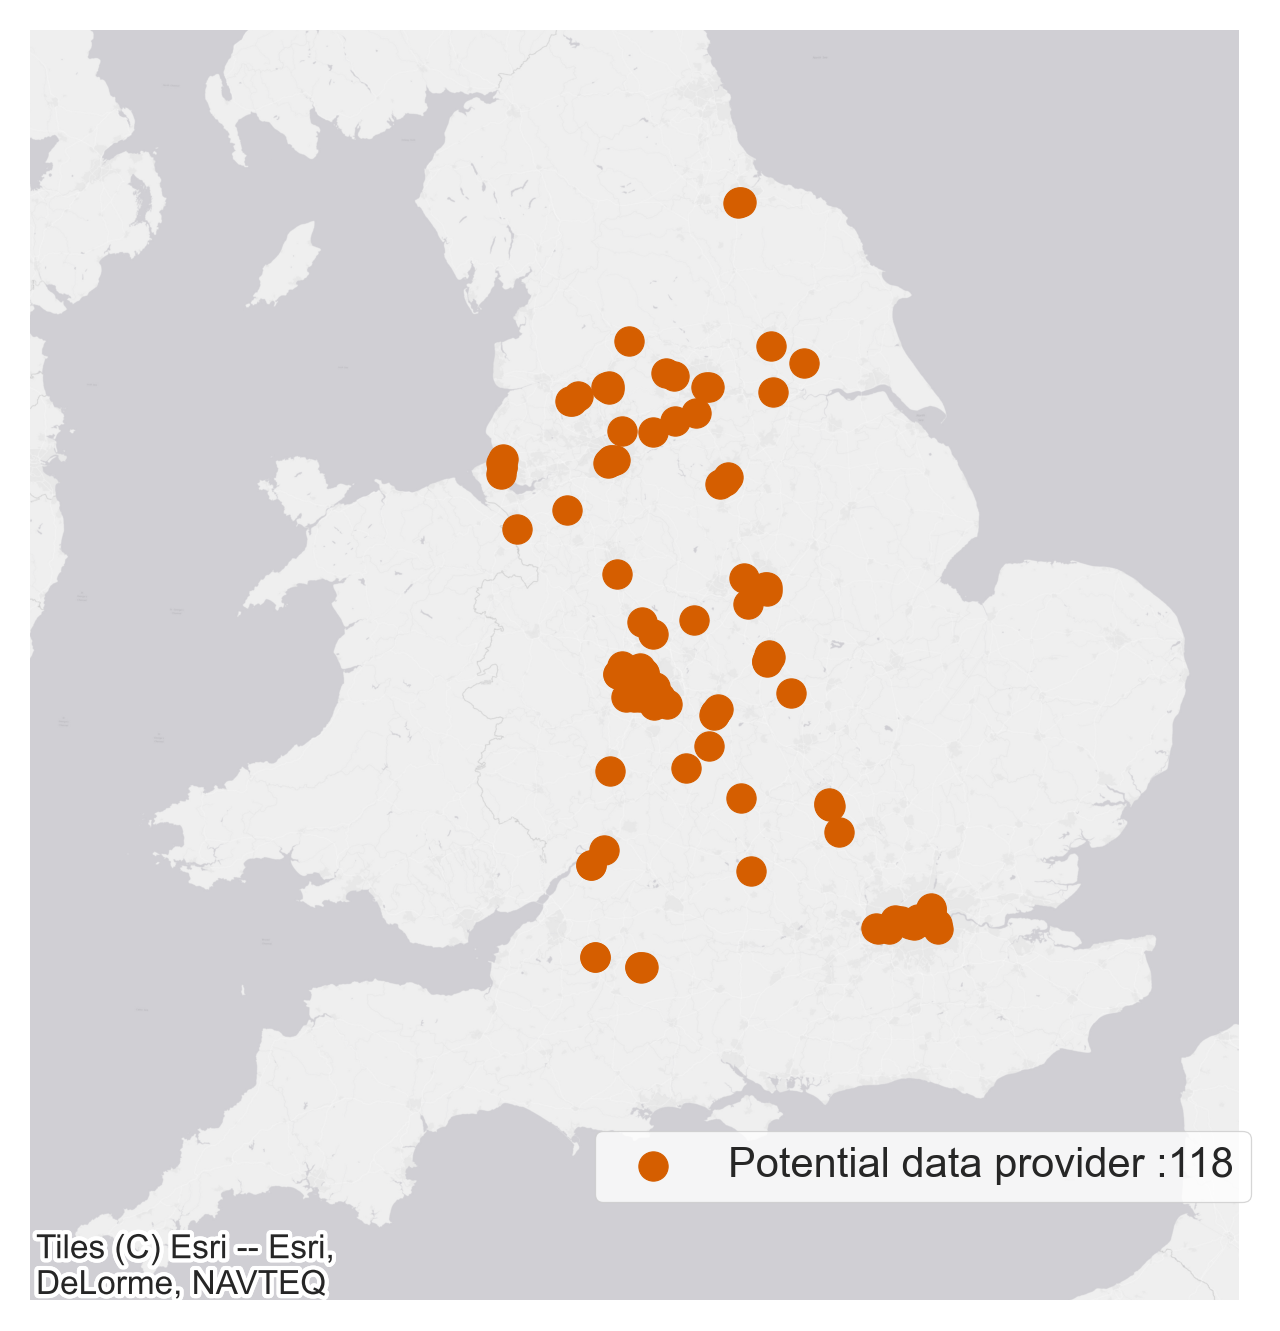 Figure 7b a map showing approximate locations of people monitoring counter sites and respective data providers.